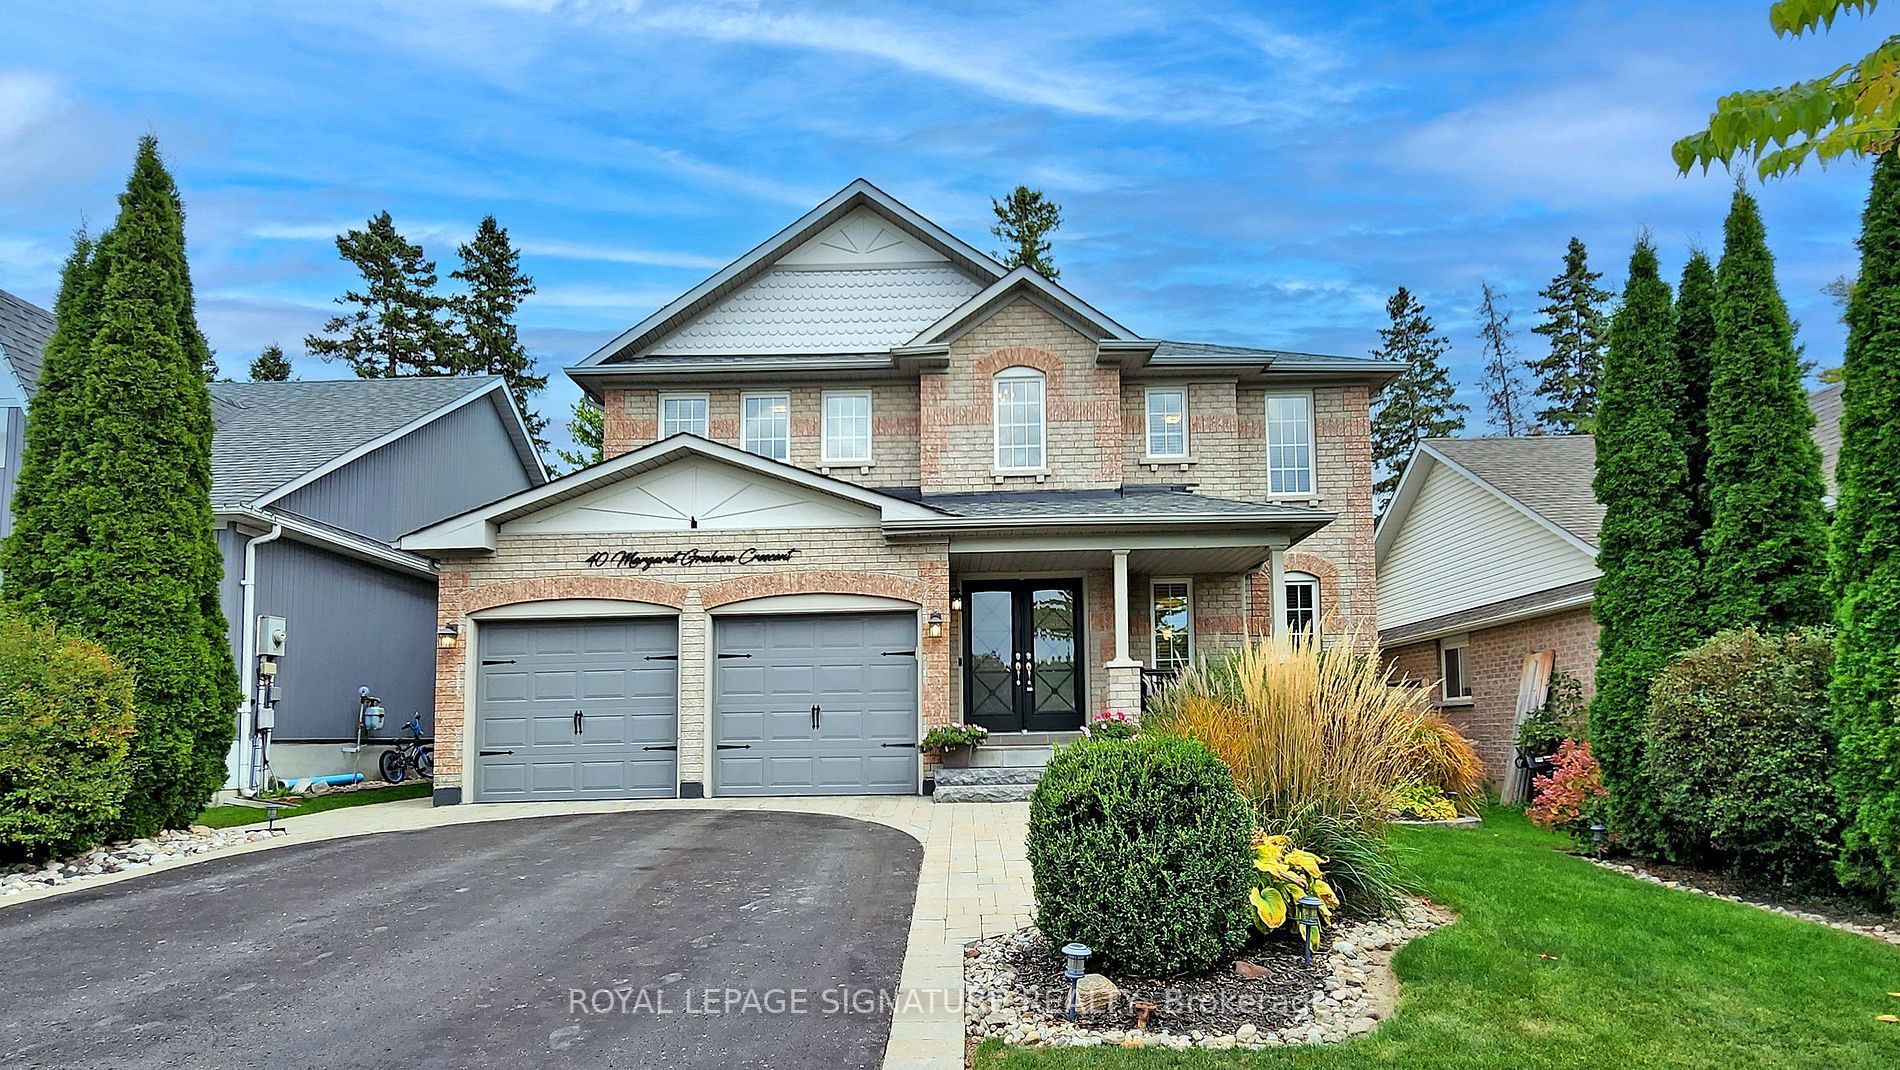 New property listed in Mt Albert, East Gwillimbury